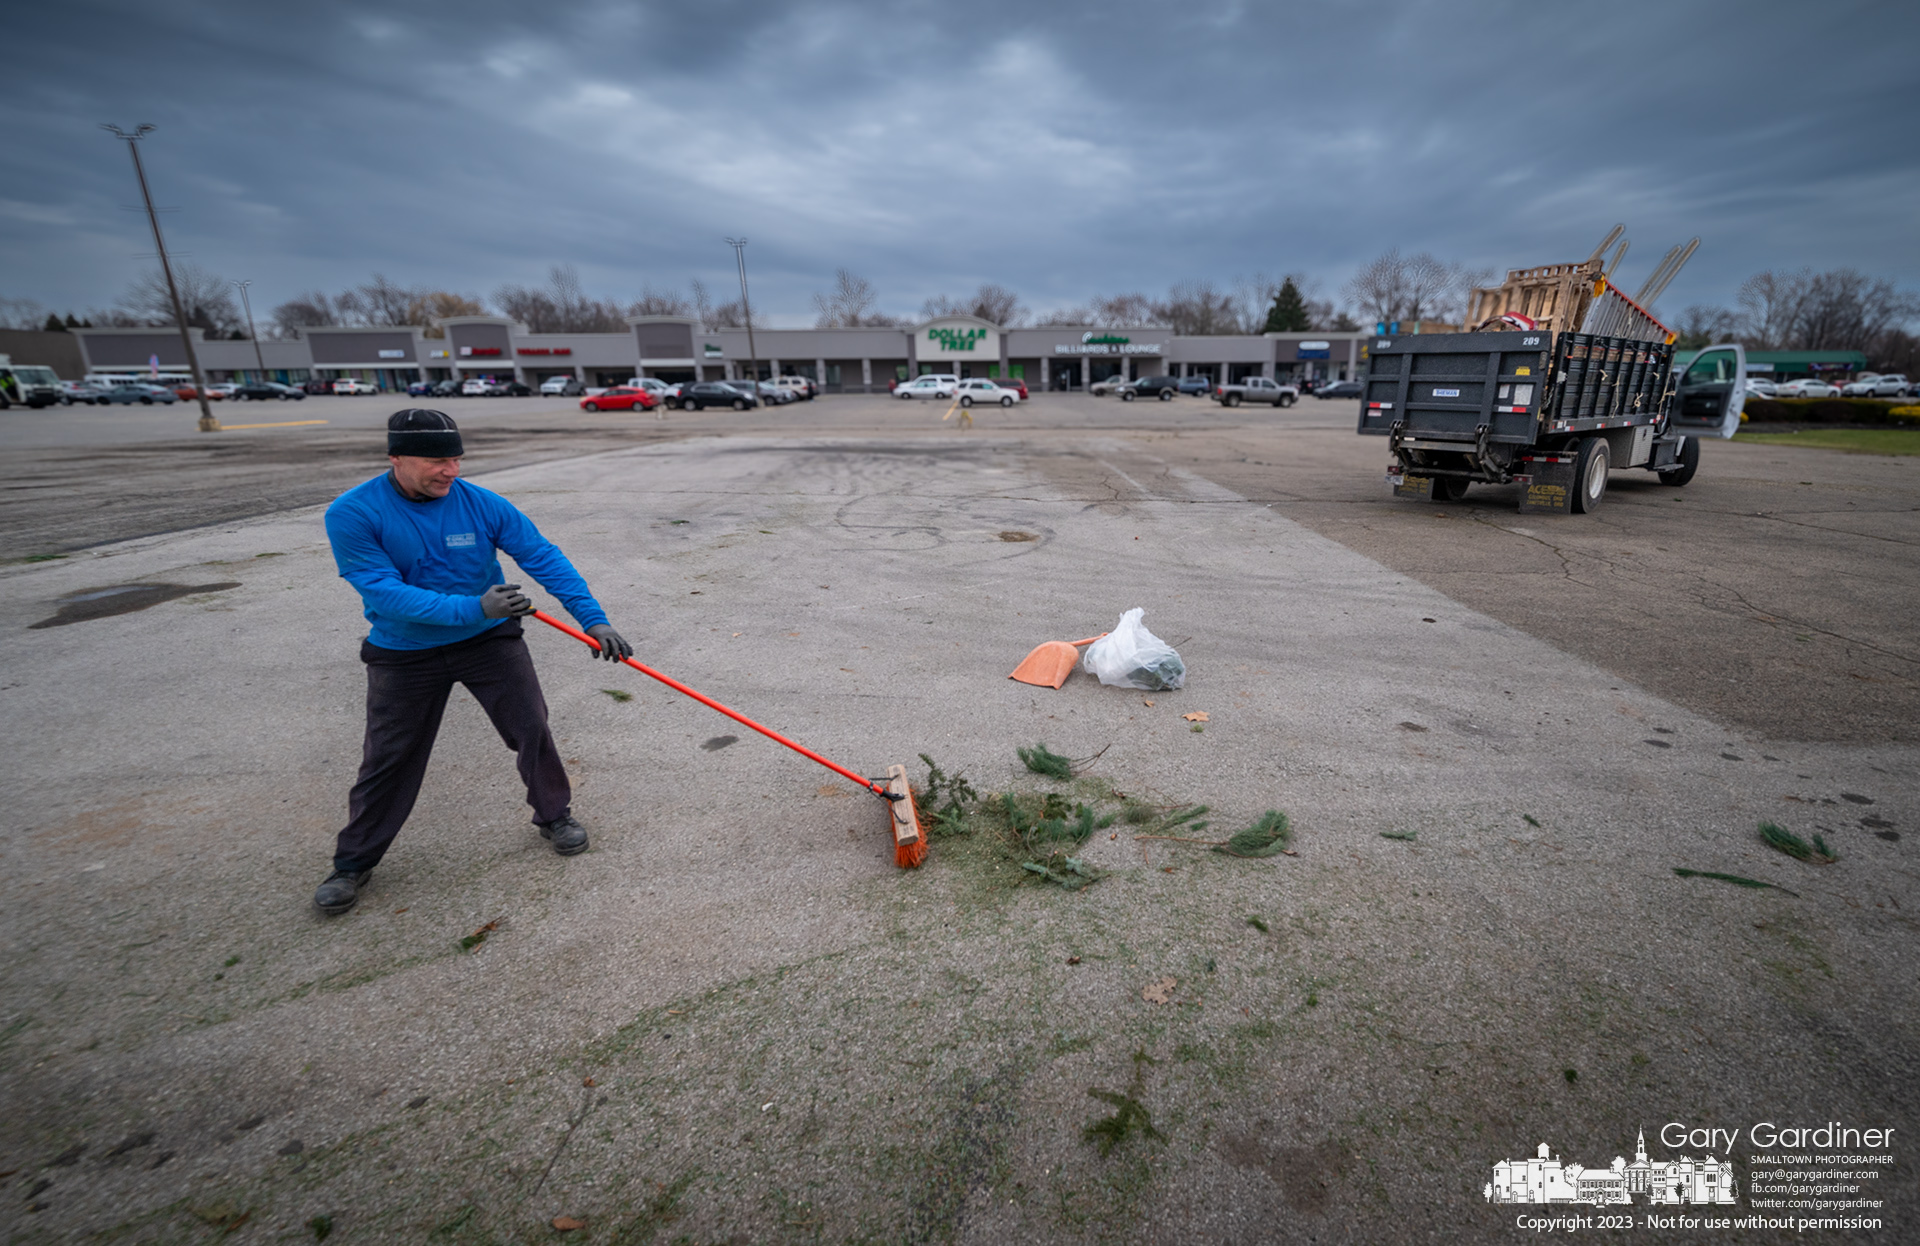 Limbs and needles are swept away as the last act of cleanup at the Christmas tree lot at Glengary Shopping Center in Blendon Township as it shuts down for the season. My Final Photo for December 22, 2023.